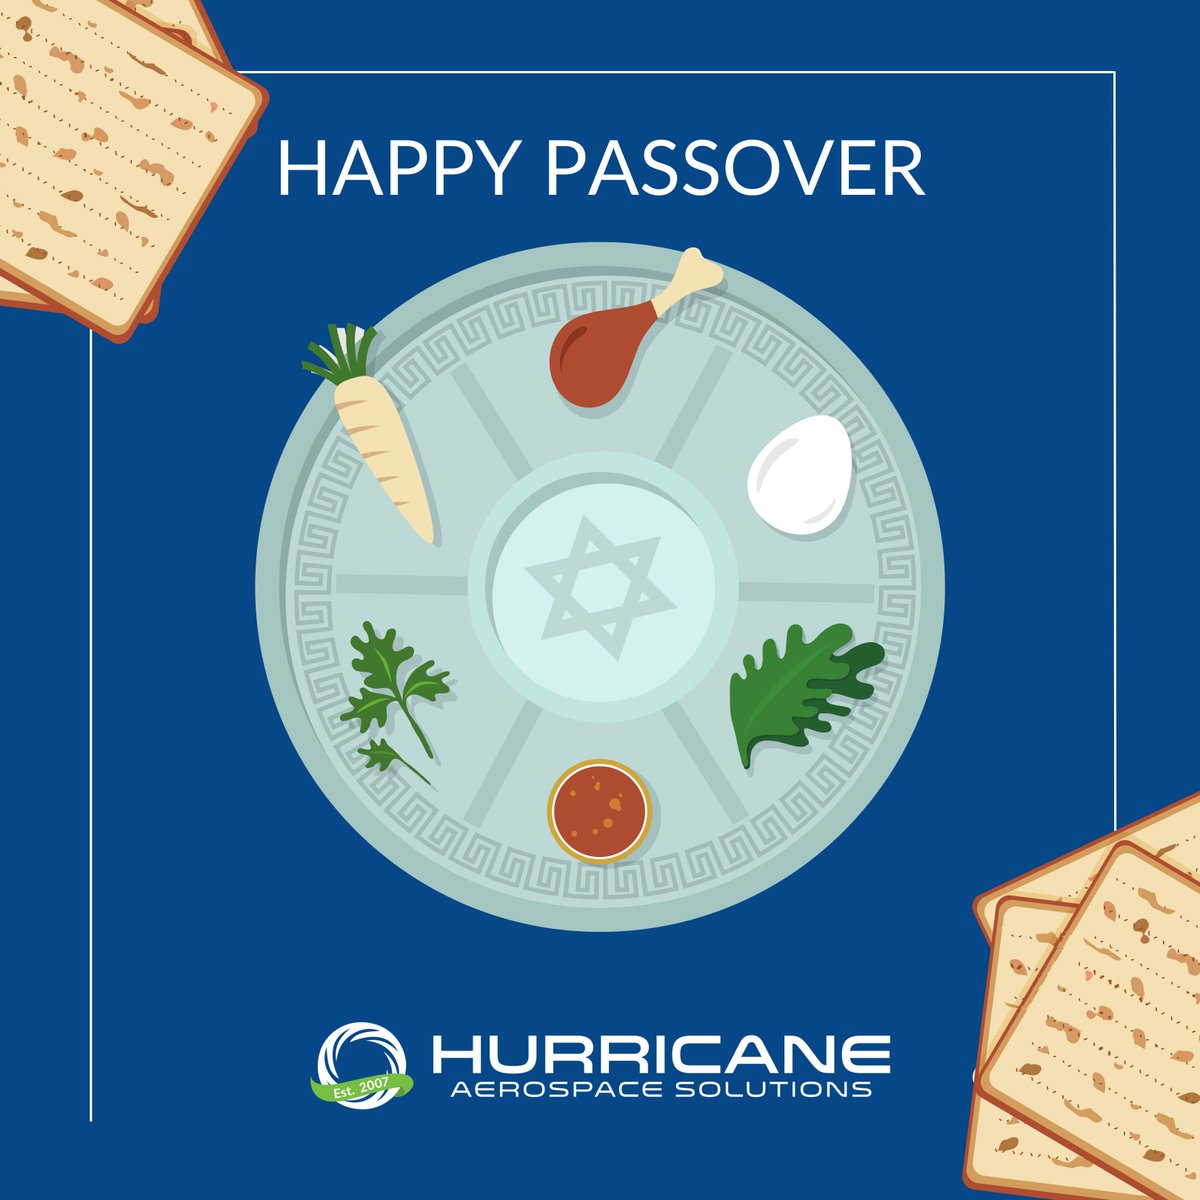 Happy Pesach to all who celebrate! 

#hurricaneaerospace #hurricaneaerospacesolutions #defensesolutions #commercialsolutions #OEMs #aircraftdistribution #womenowned #aircraftparts #hubzone #hubzonecertified #wosb #wbenc